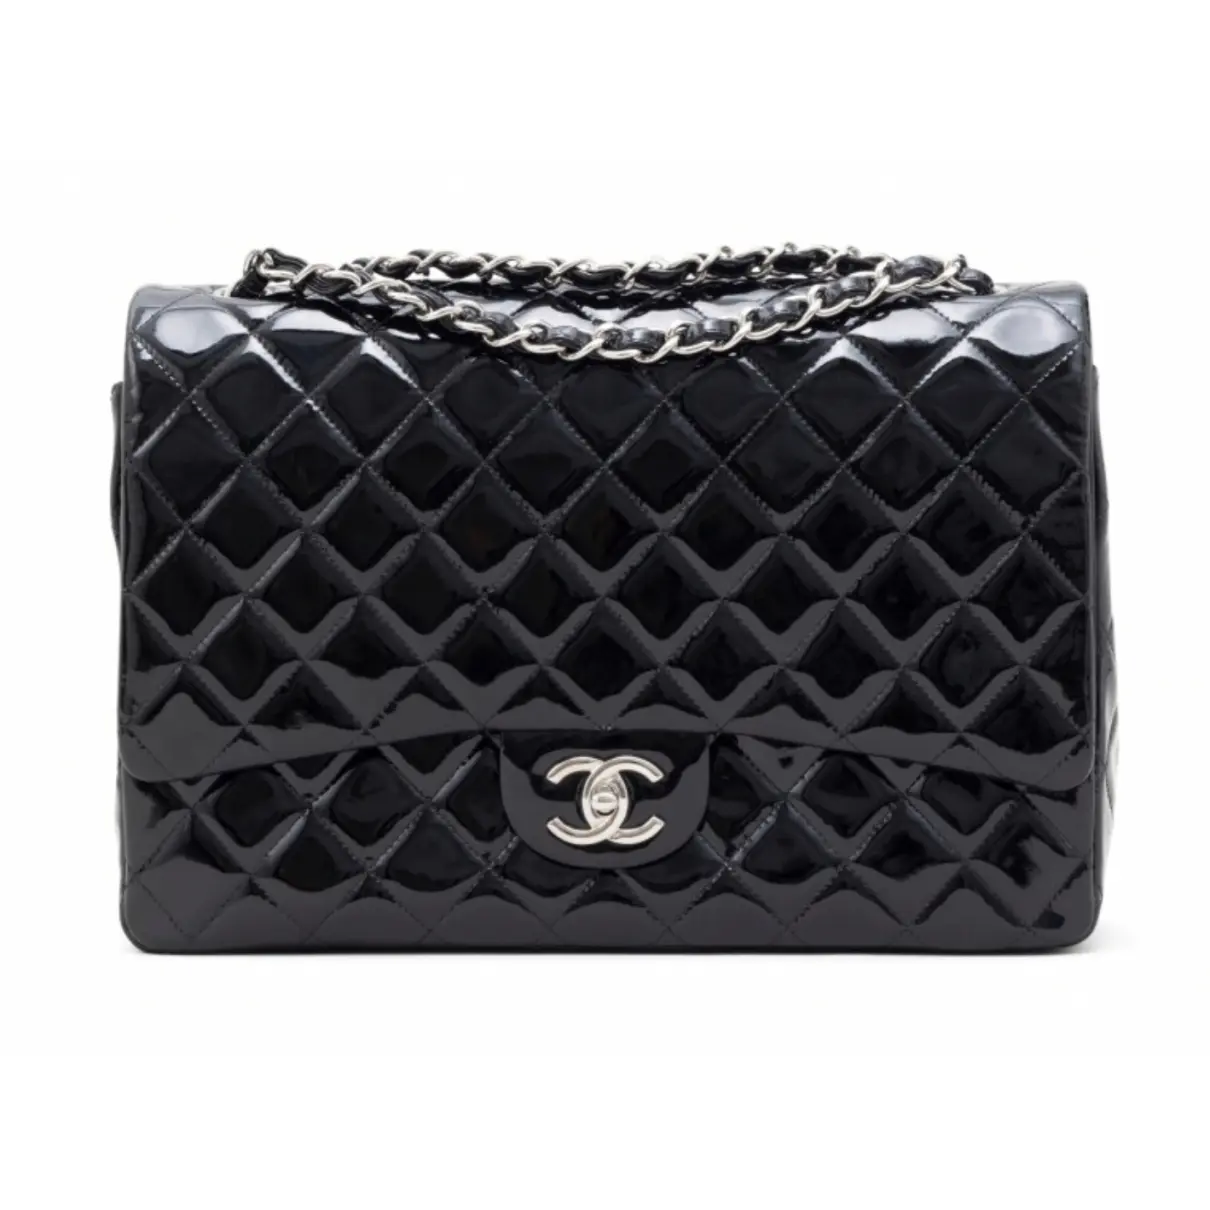 Timeless/Classique patent leather crossbody bag Chanel